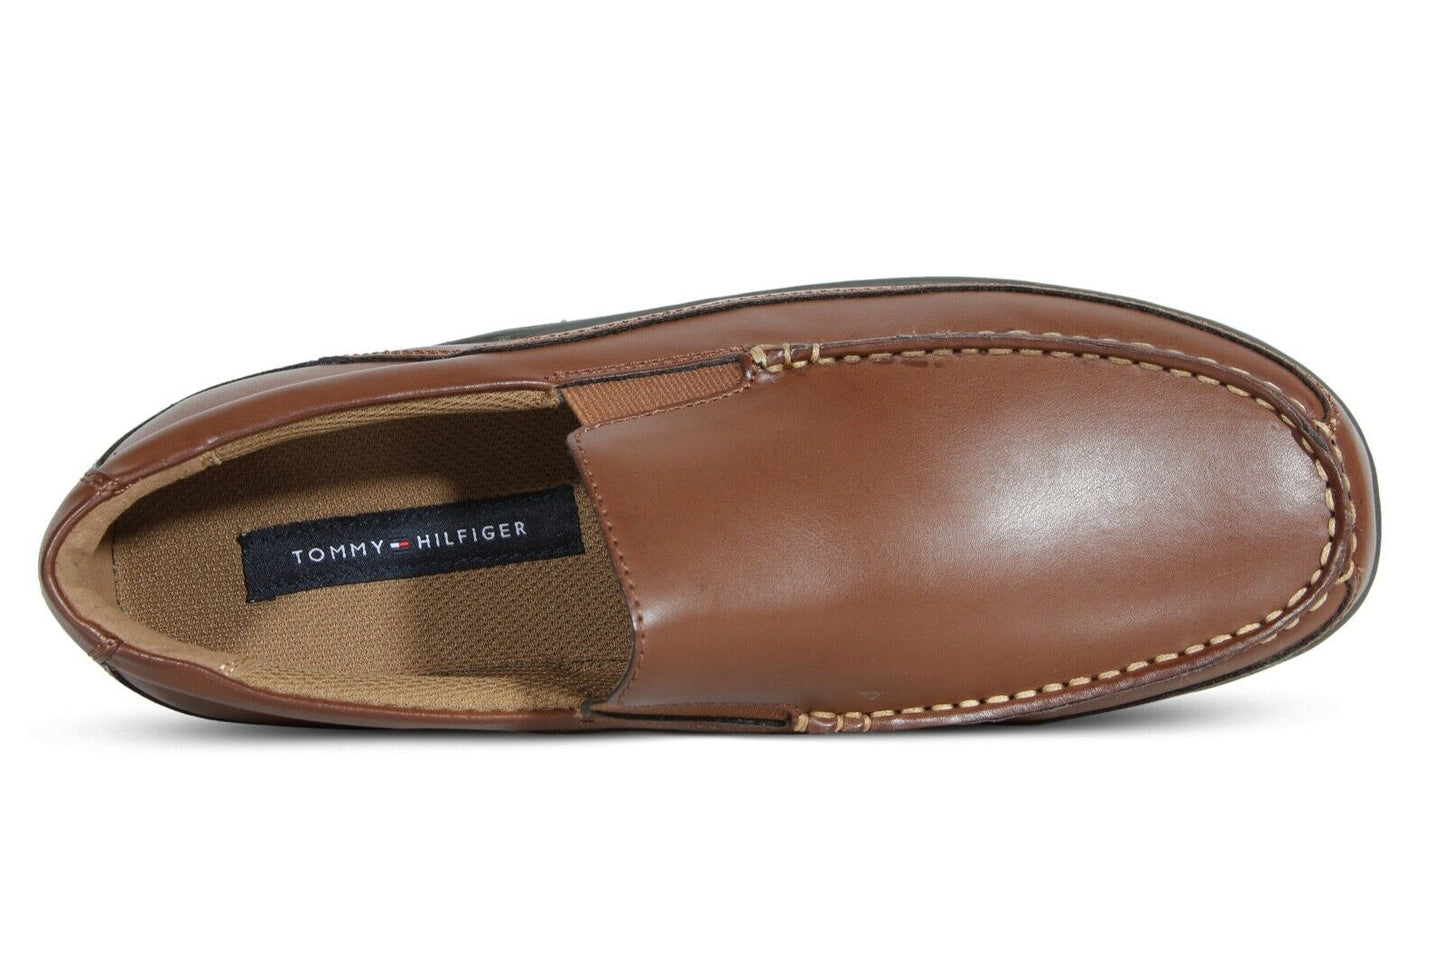 Tommy Hilfiger Kerry Men’s Shoes Leather Loafers Fashion Drivers Slip On Brown